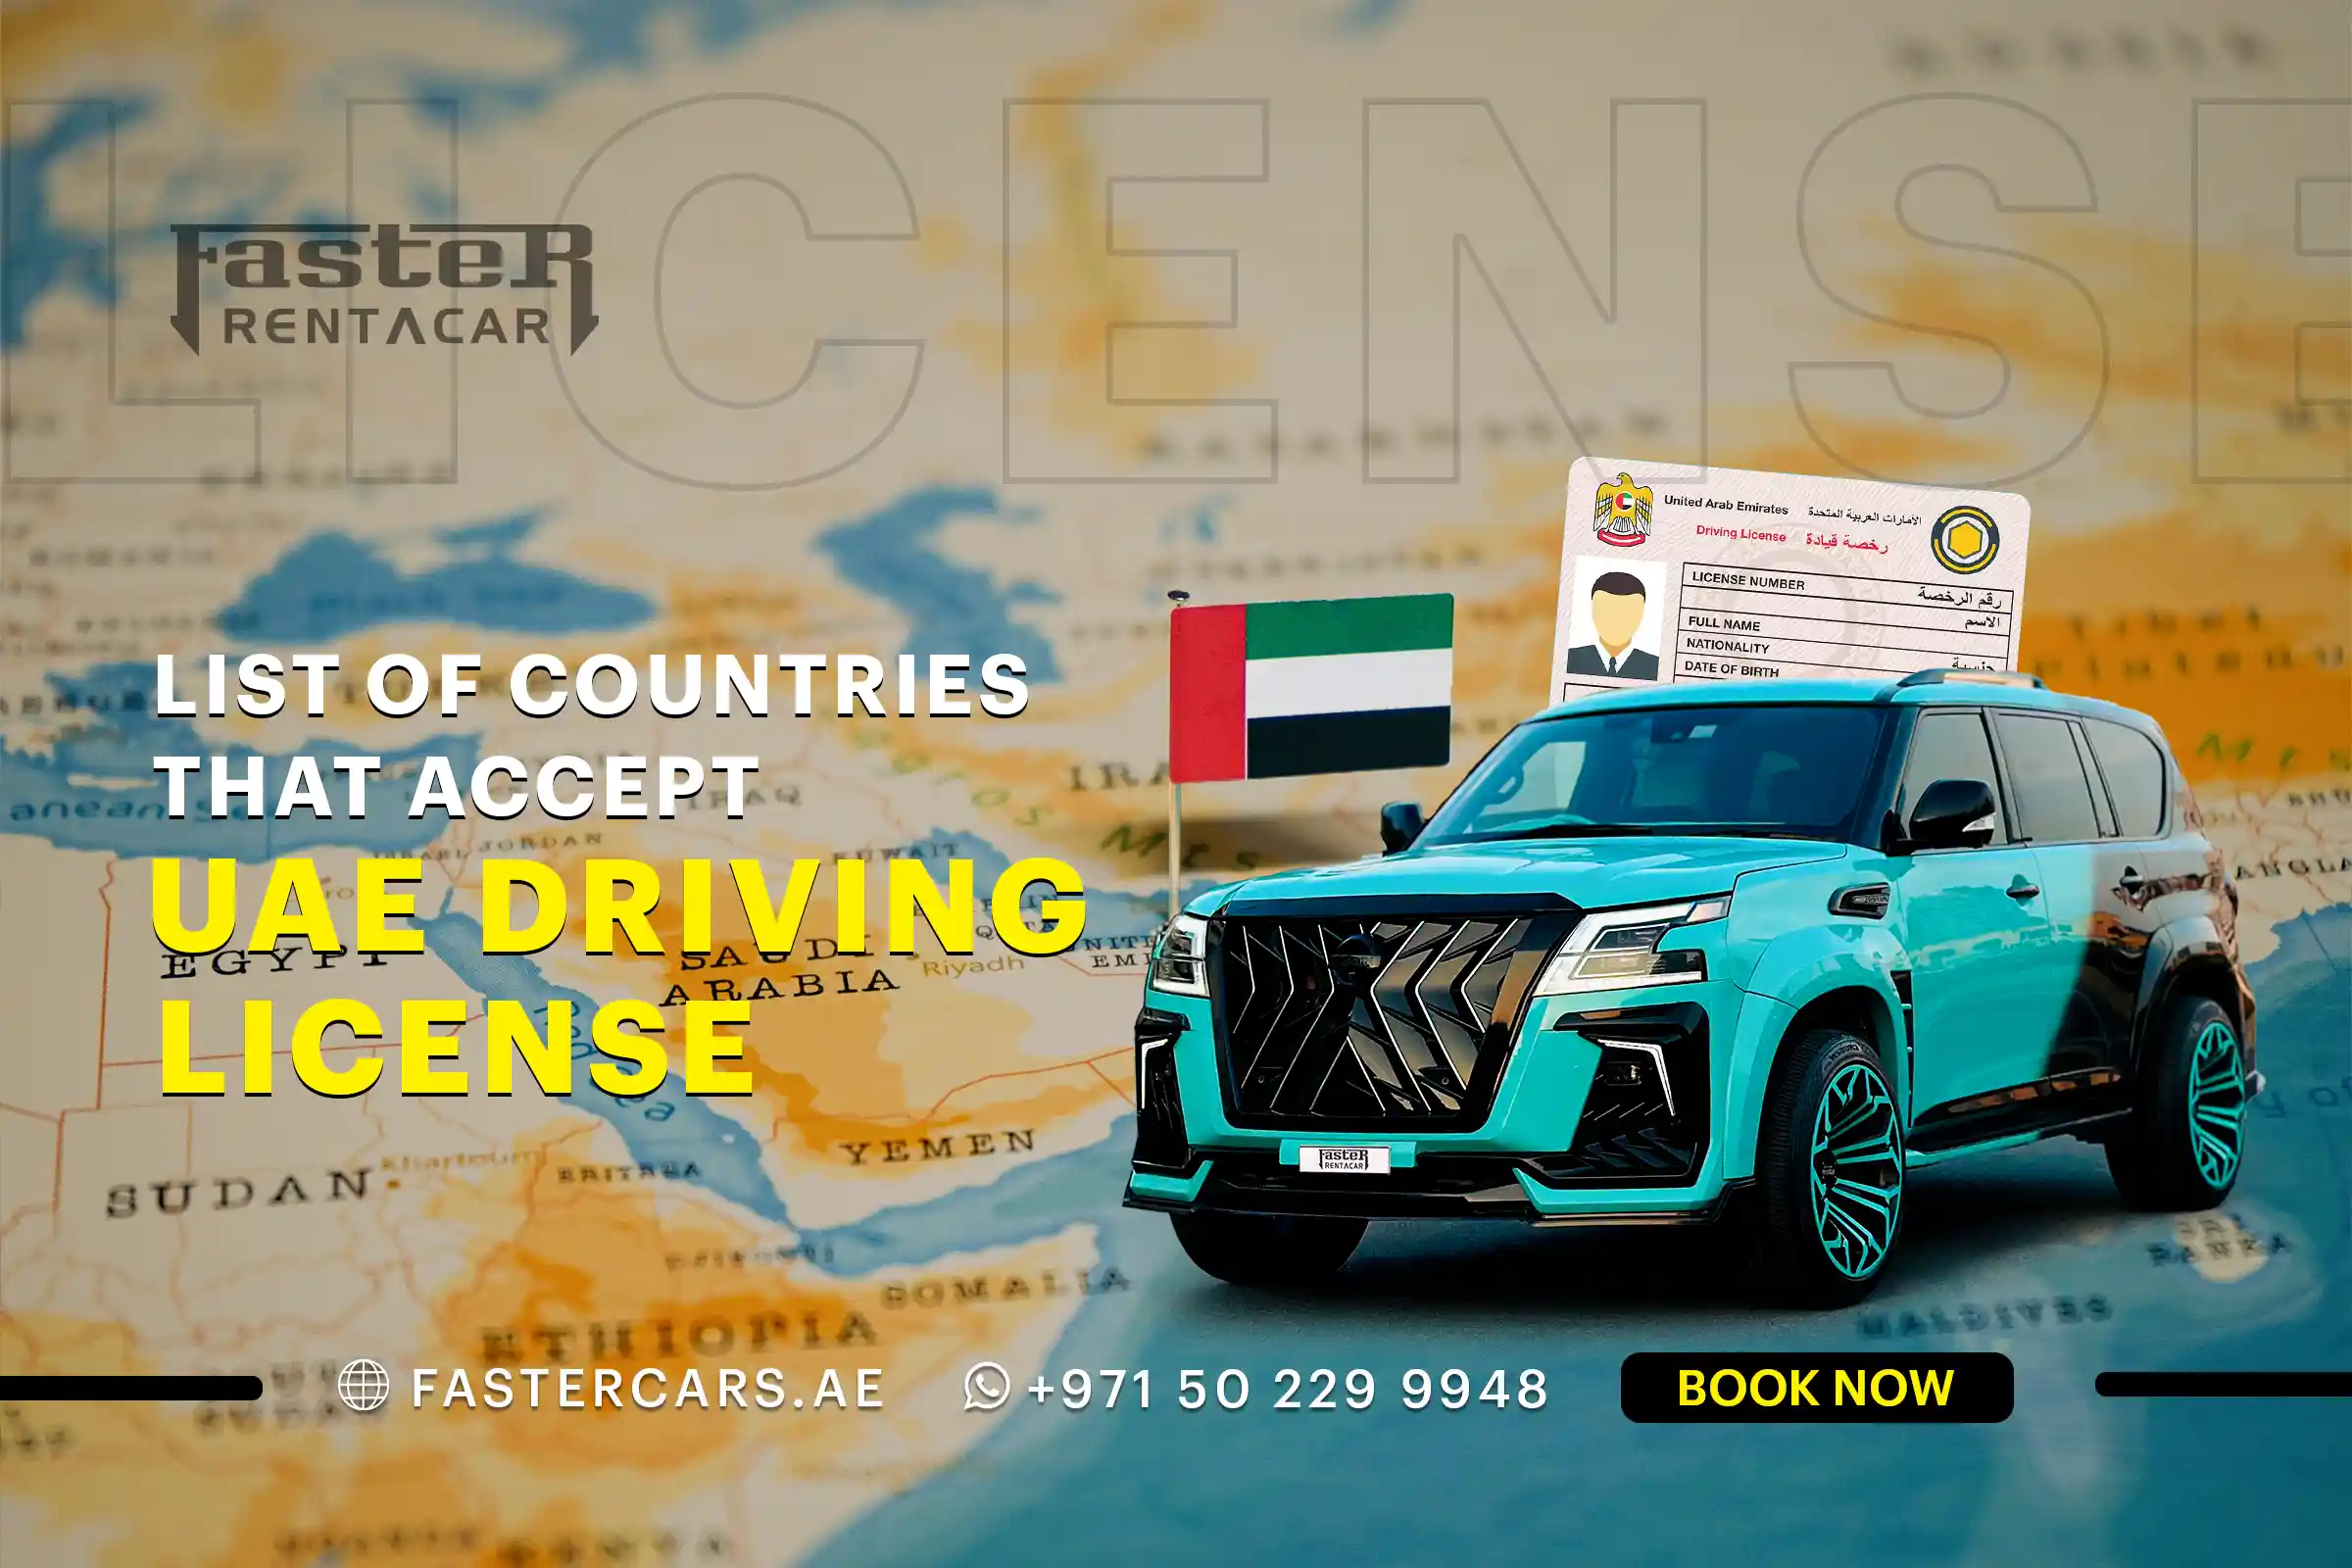 List Of Countries That Accept UAE Driving License